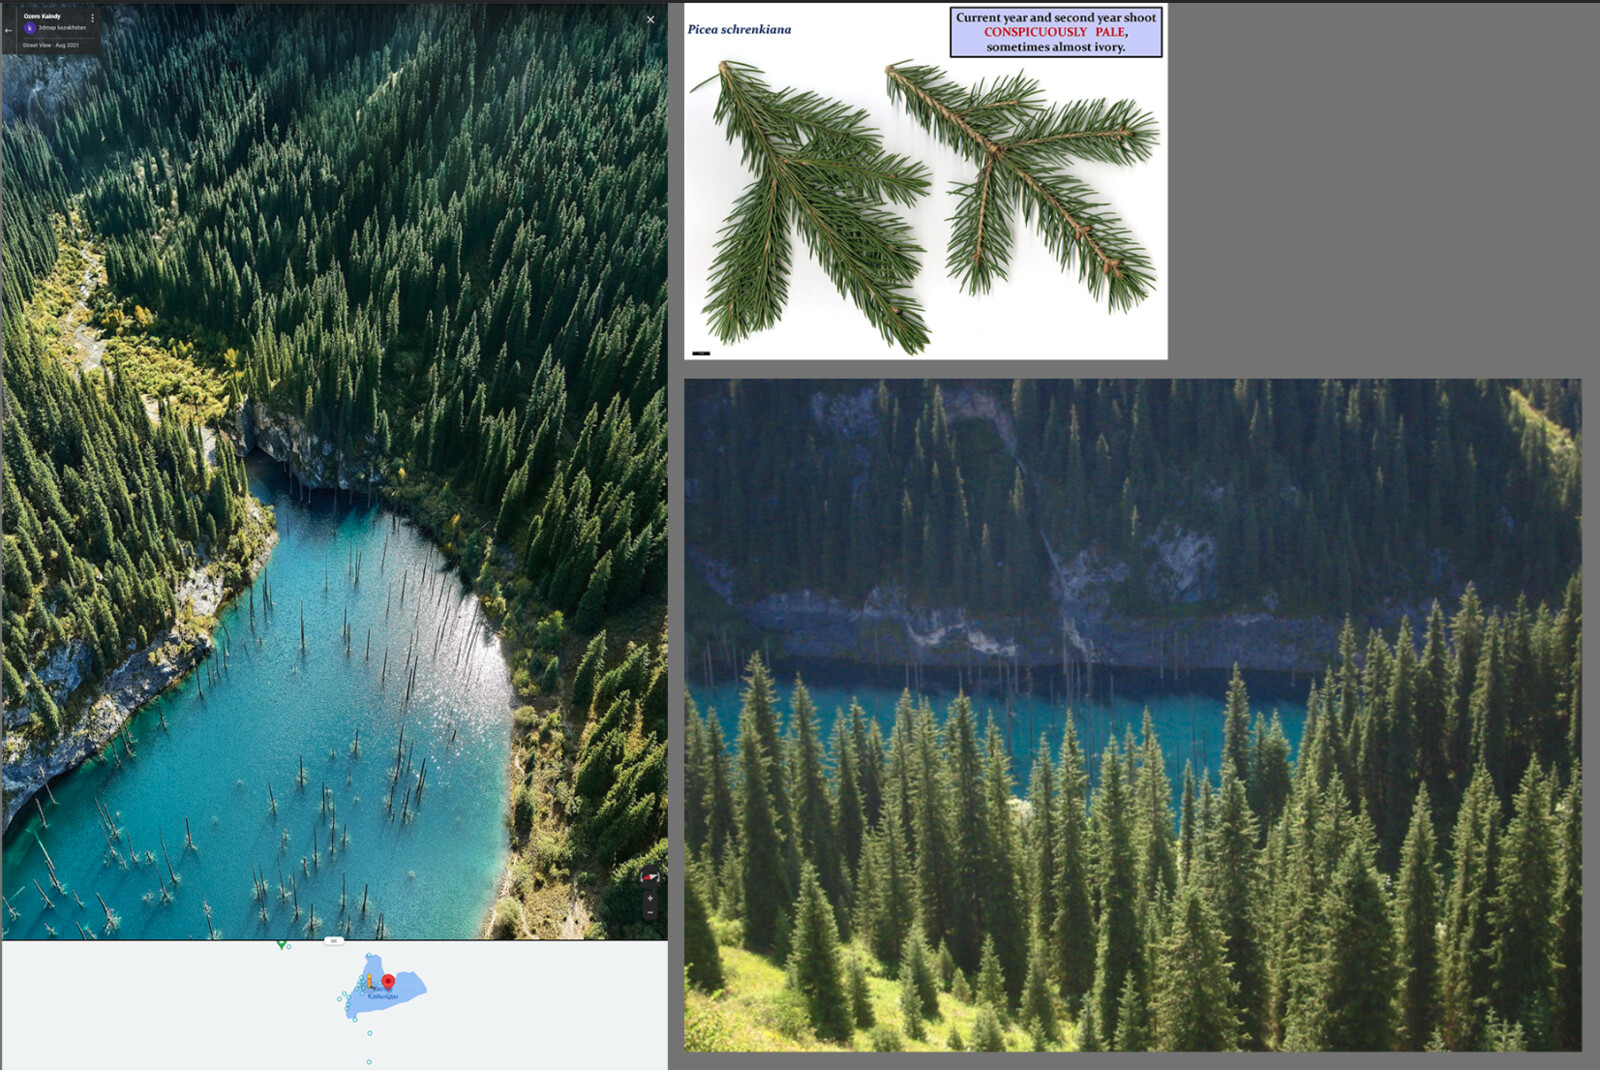 Reference images: Lake Kaindy photos from Google Maps and Asian Spruce branches